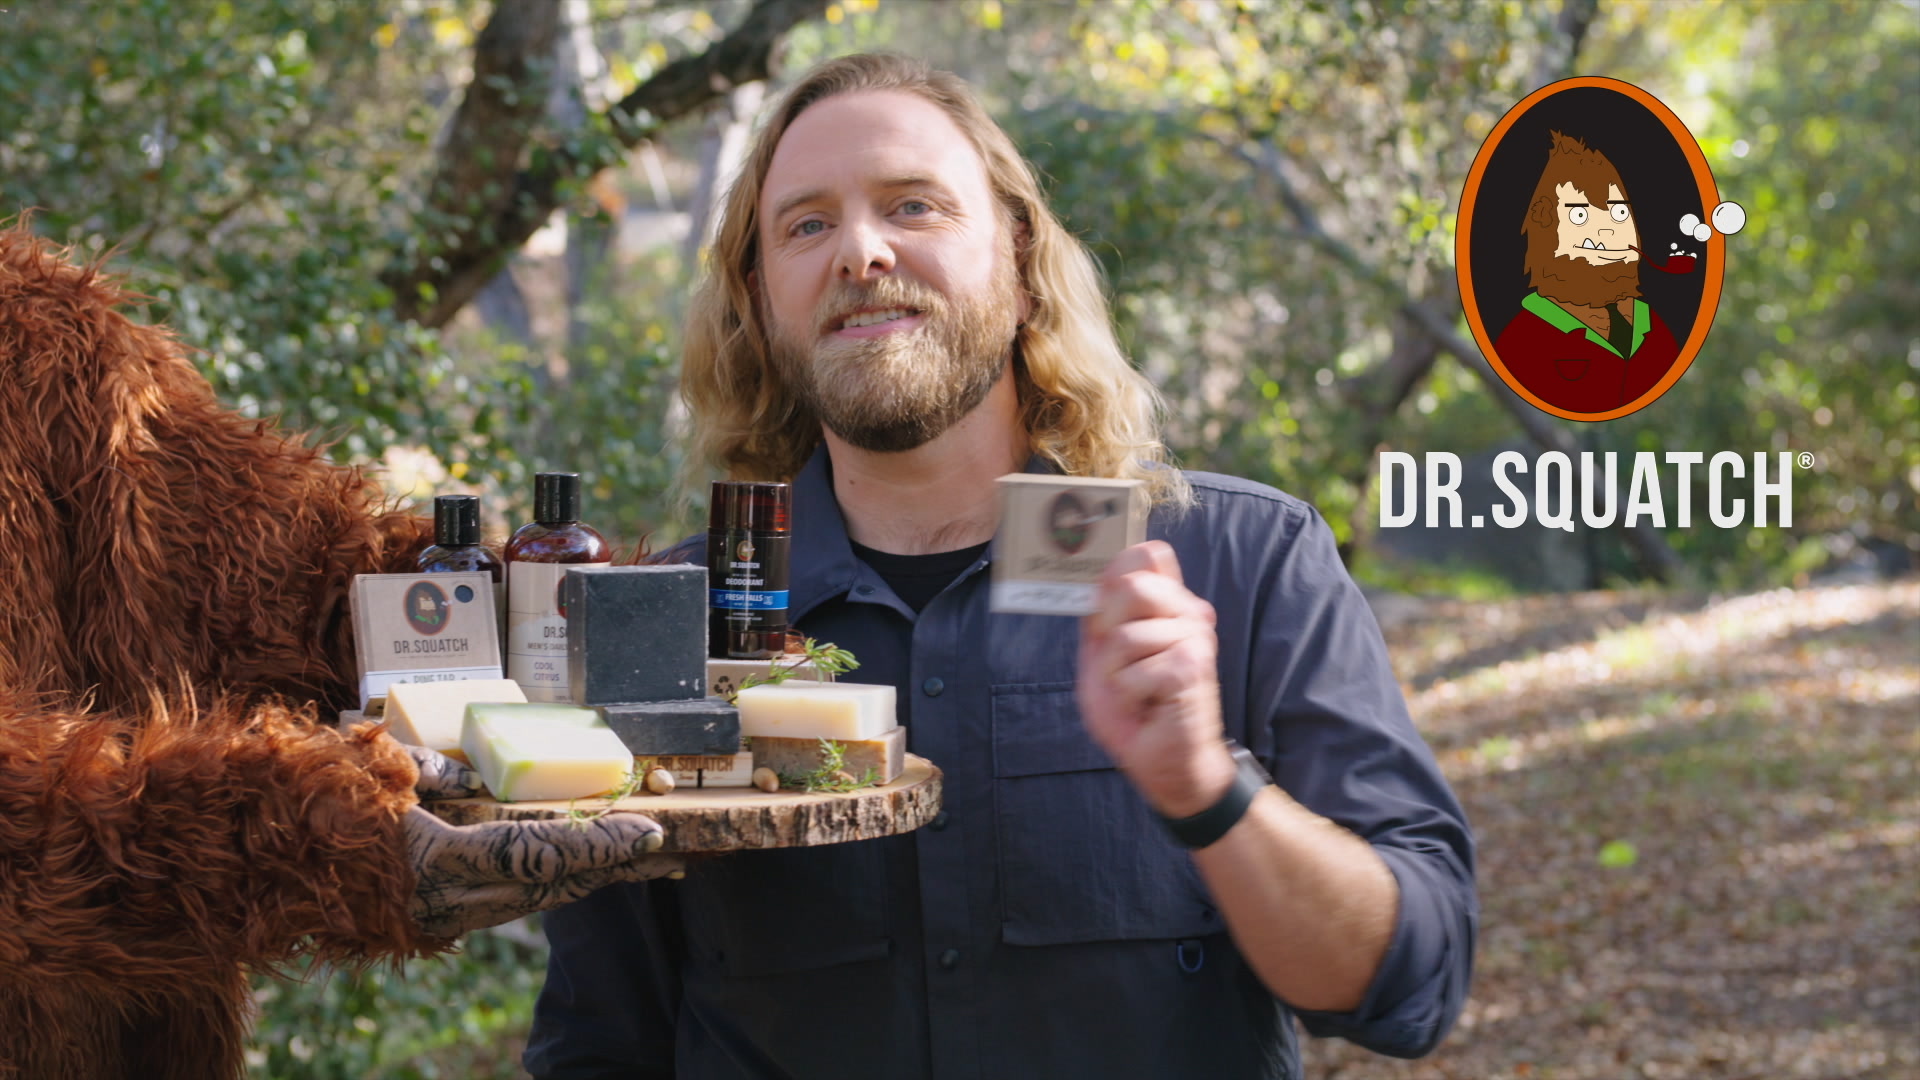 Brand Profile: How Dr. Squatch went from a viral social media